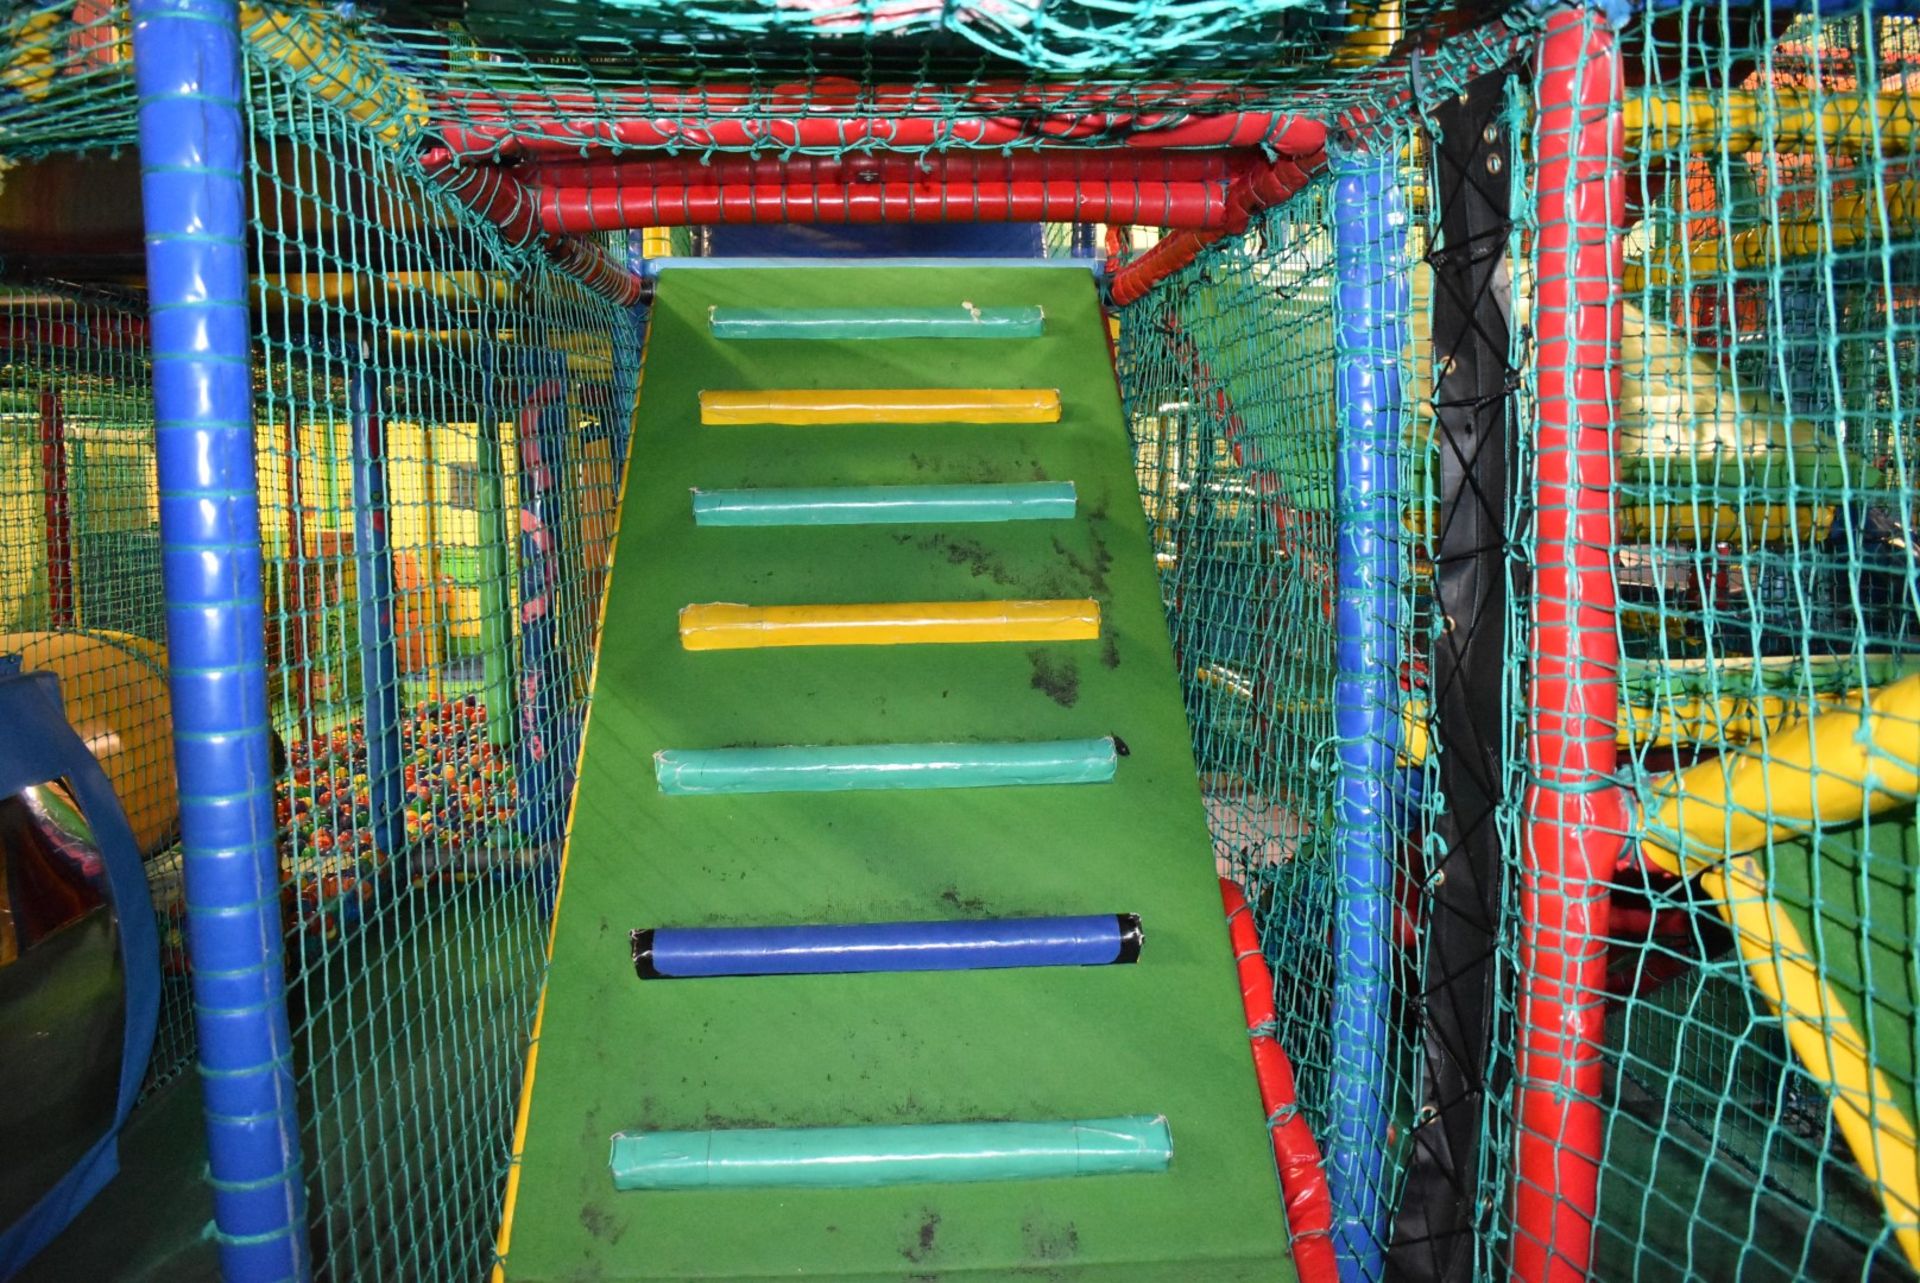 Bramleys Big Adventure Playground - Giant Action-Packed Playcentre With Slides, Zip Line Swings, - Image 43 of 128